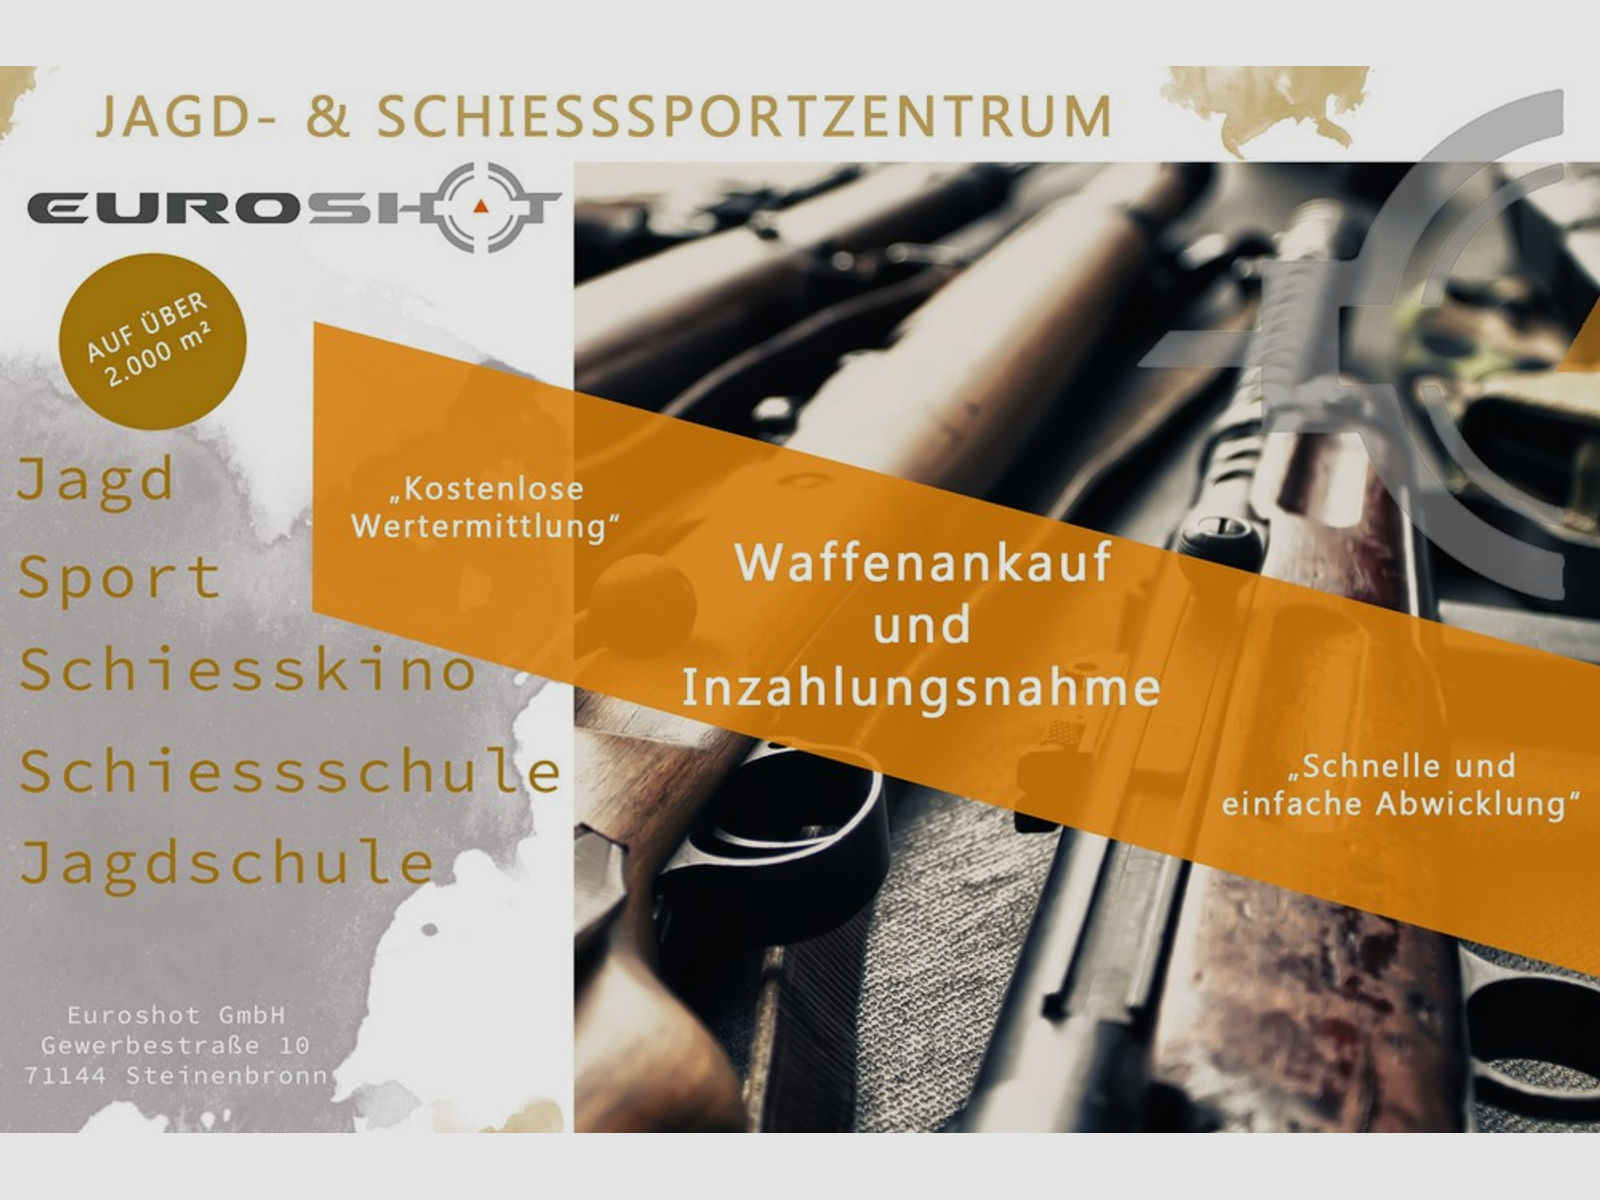 Browning X-Bolt LR McM FLD CK .308Win Repetierbüchse